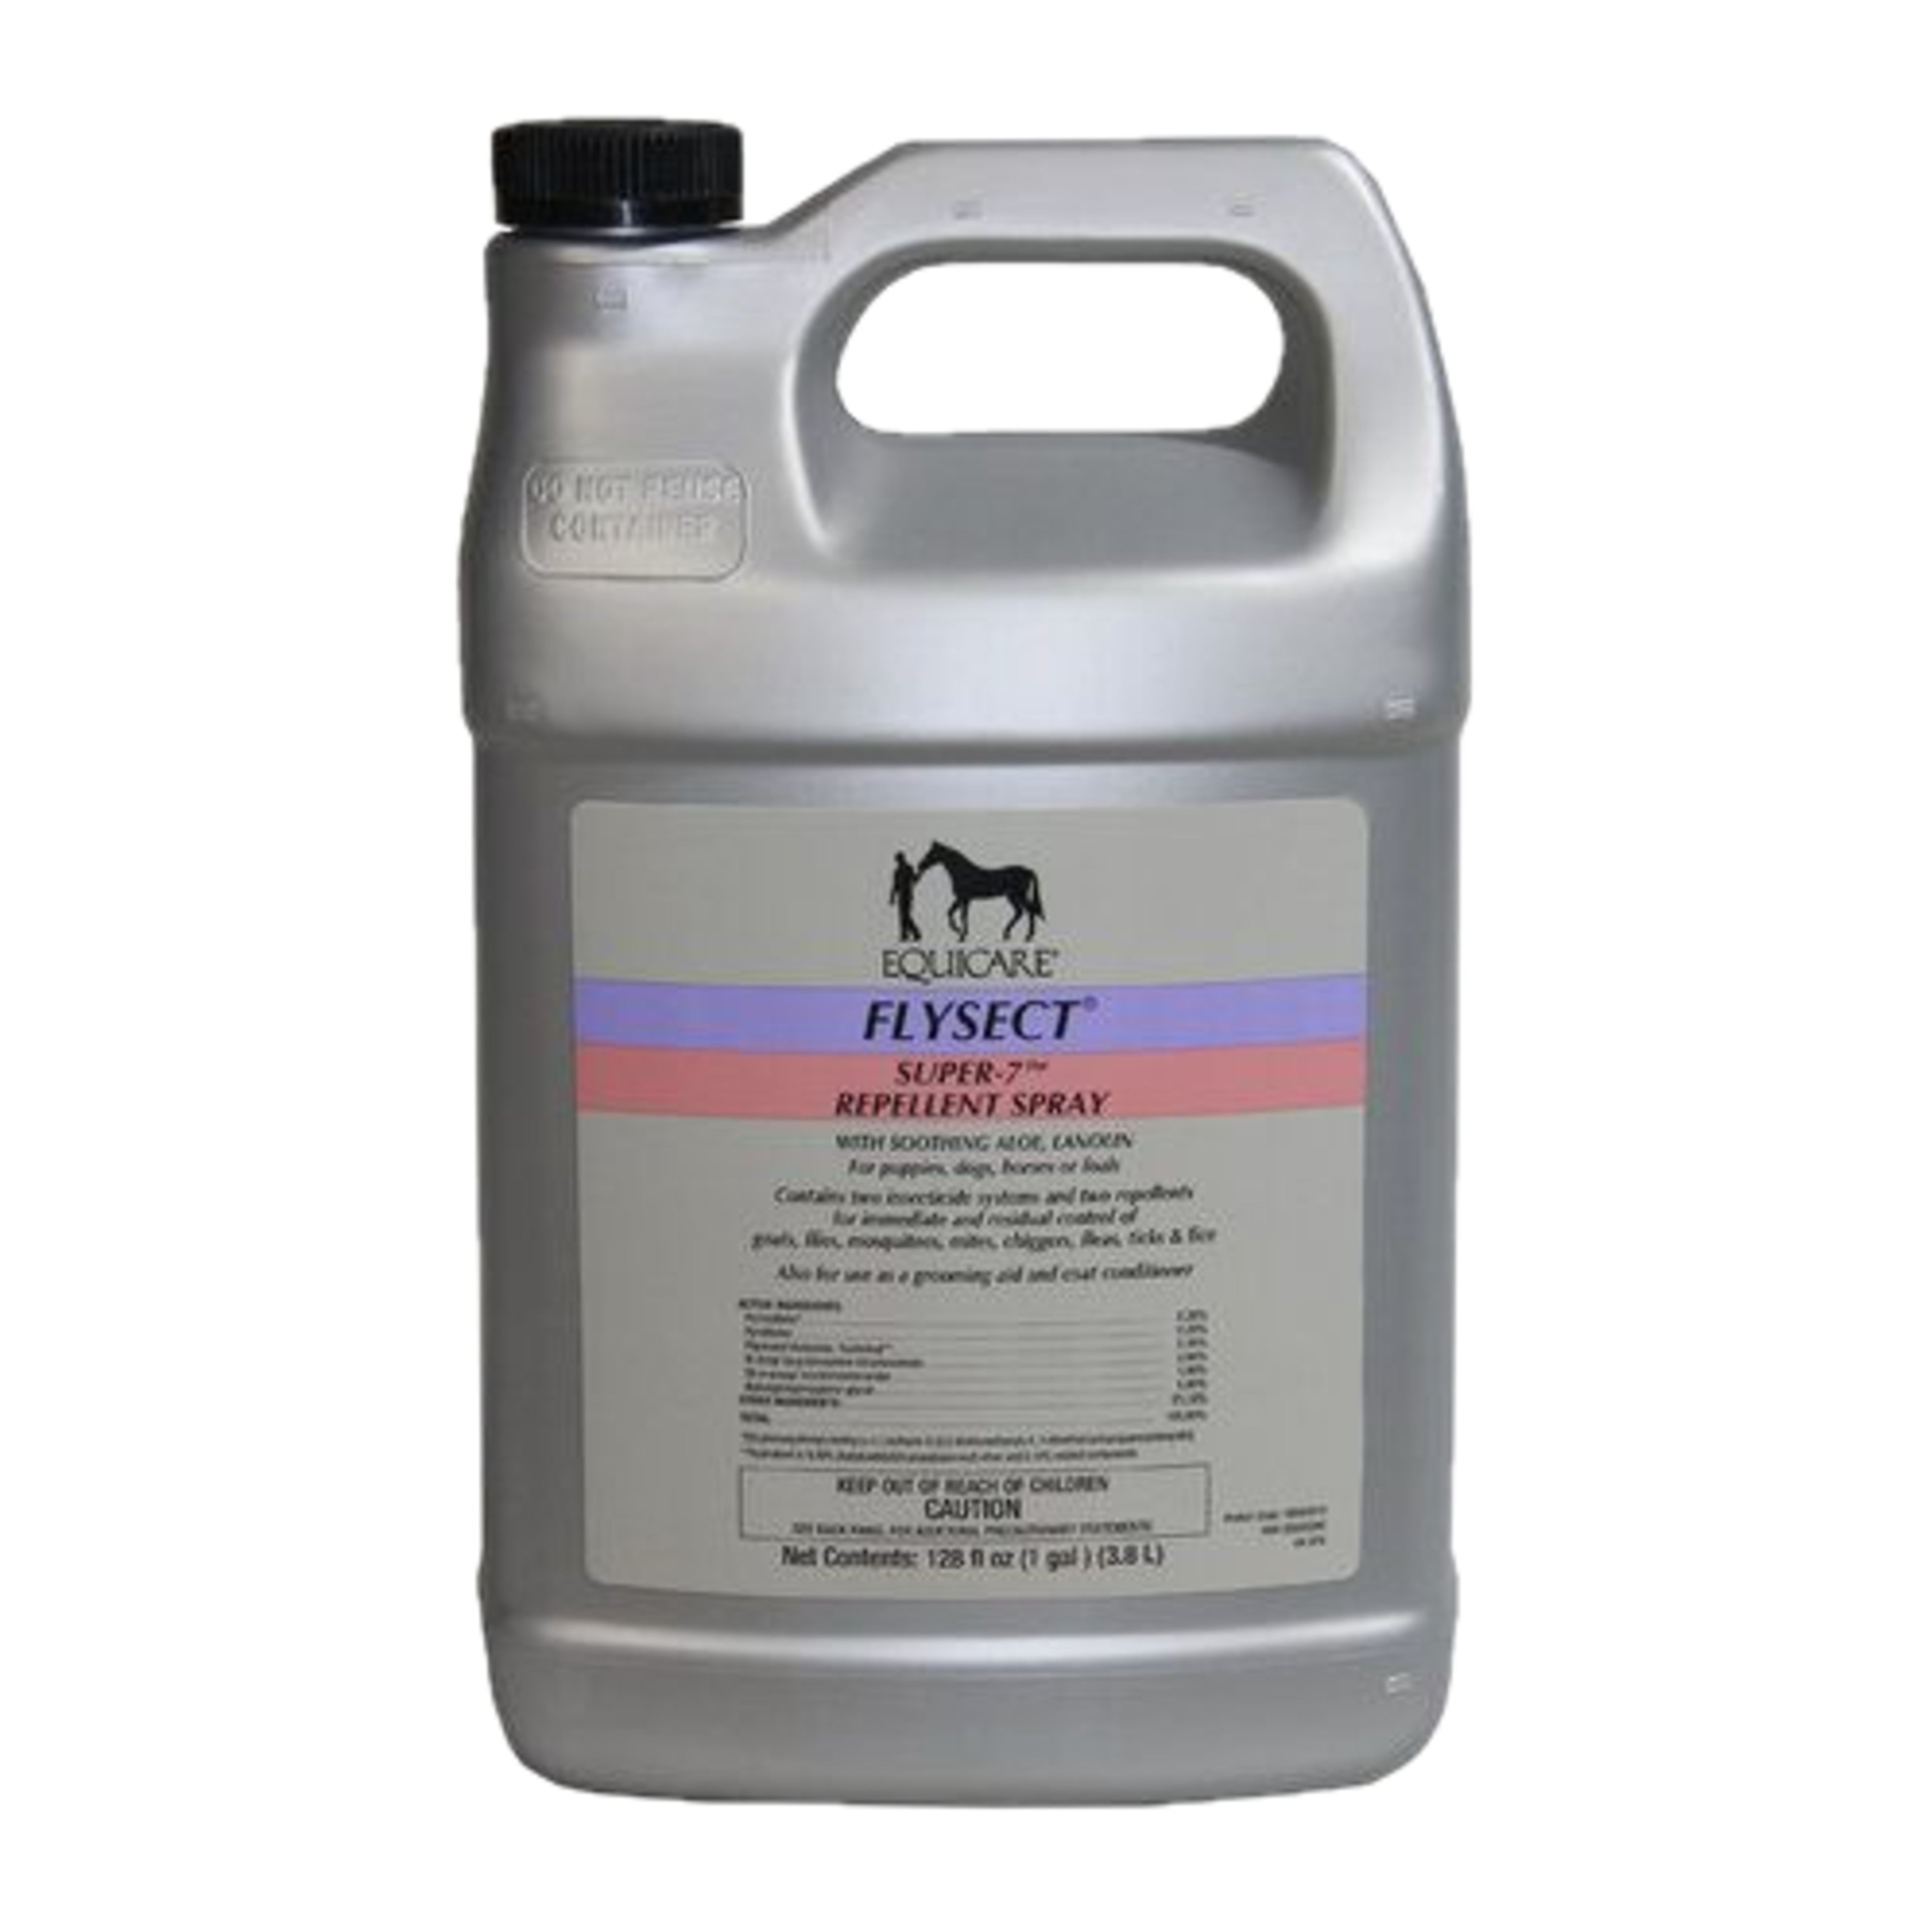 EquiCare Flysect Super-7 gallon